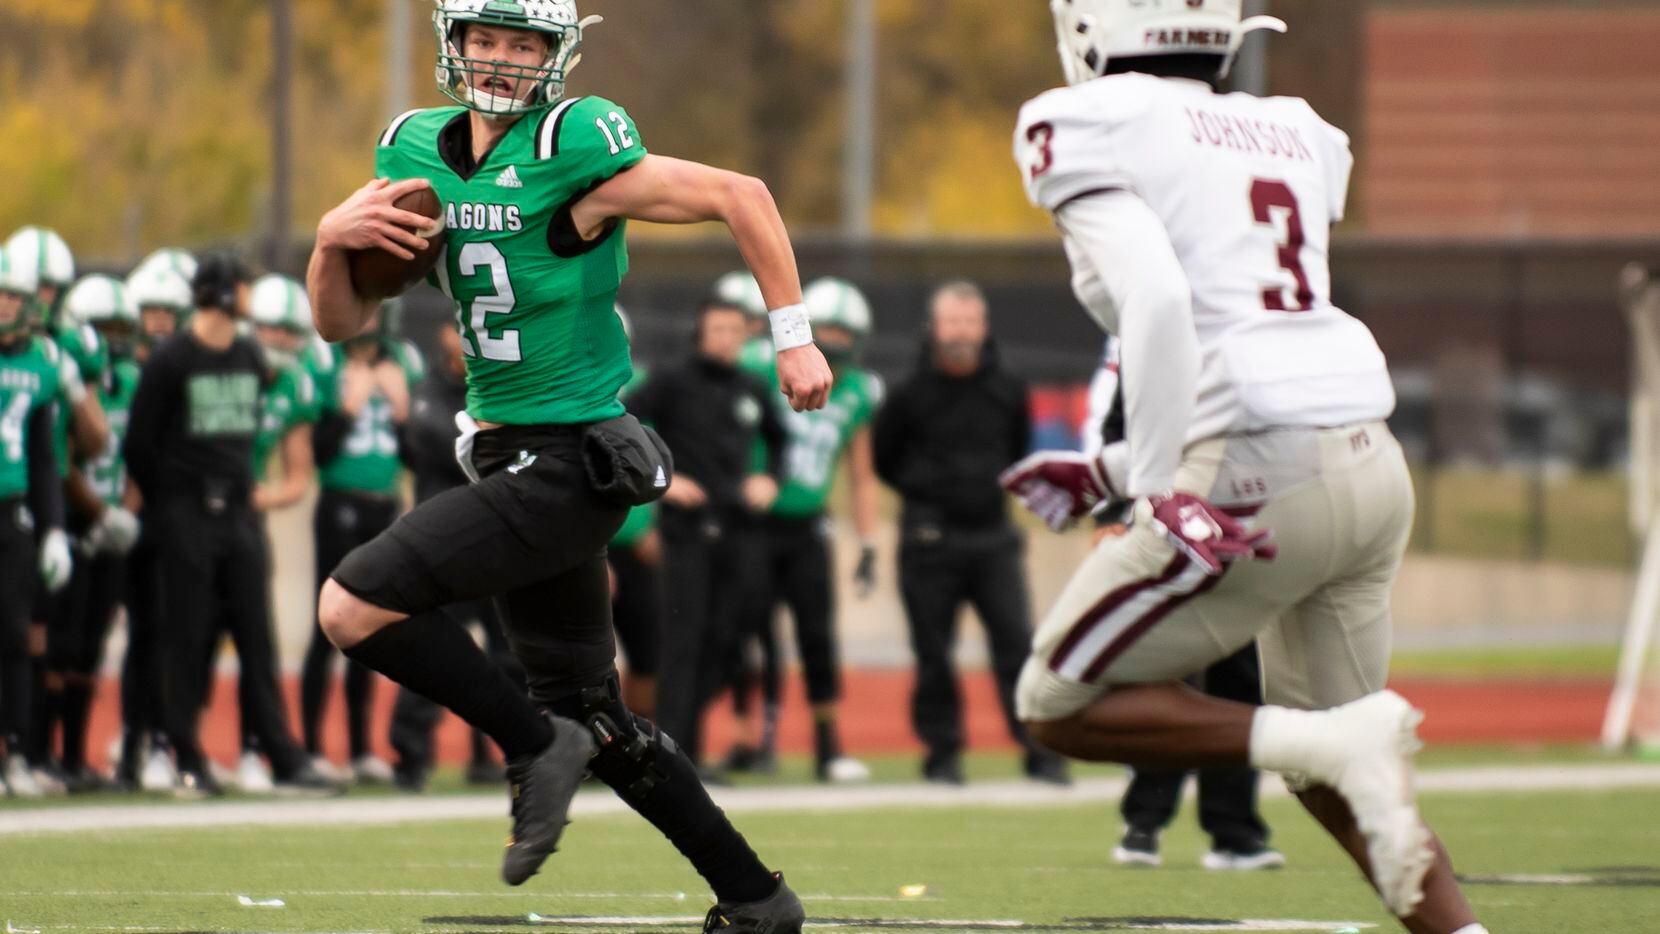 Southlake Carroll junior Kaden Anderson (12) rushes down the field as Lewisville senior...